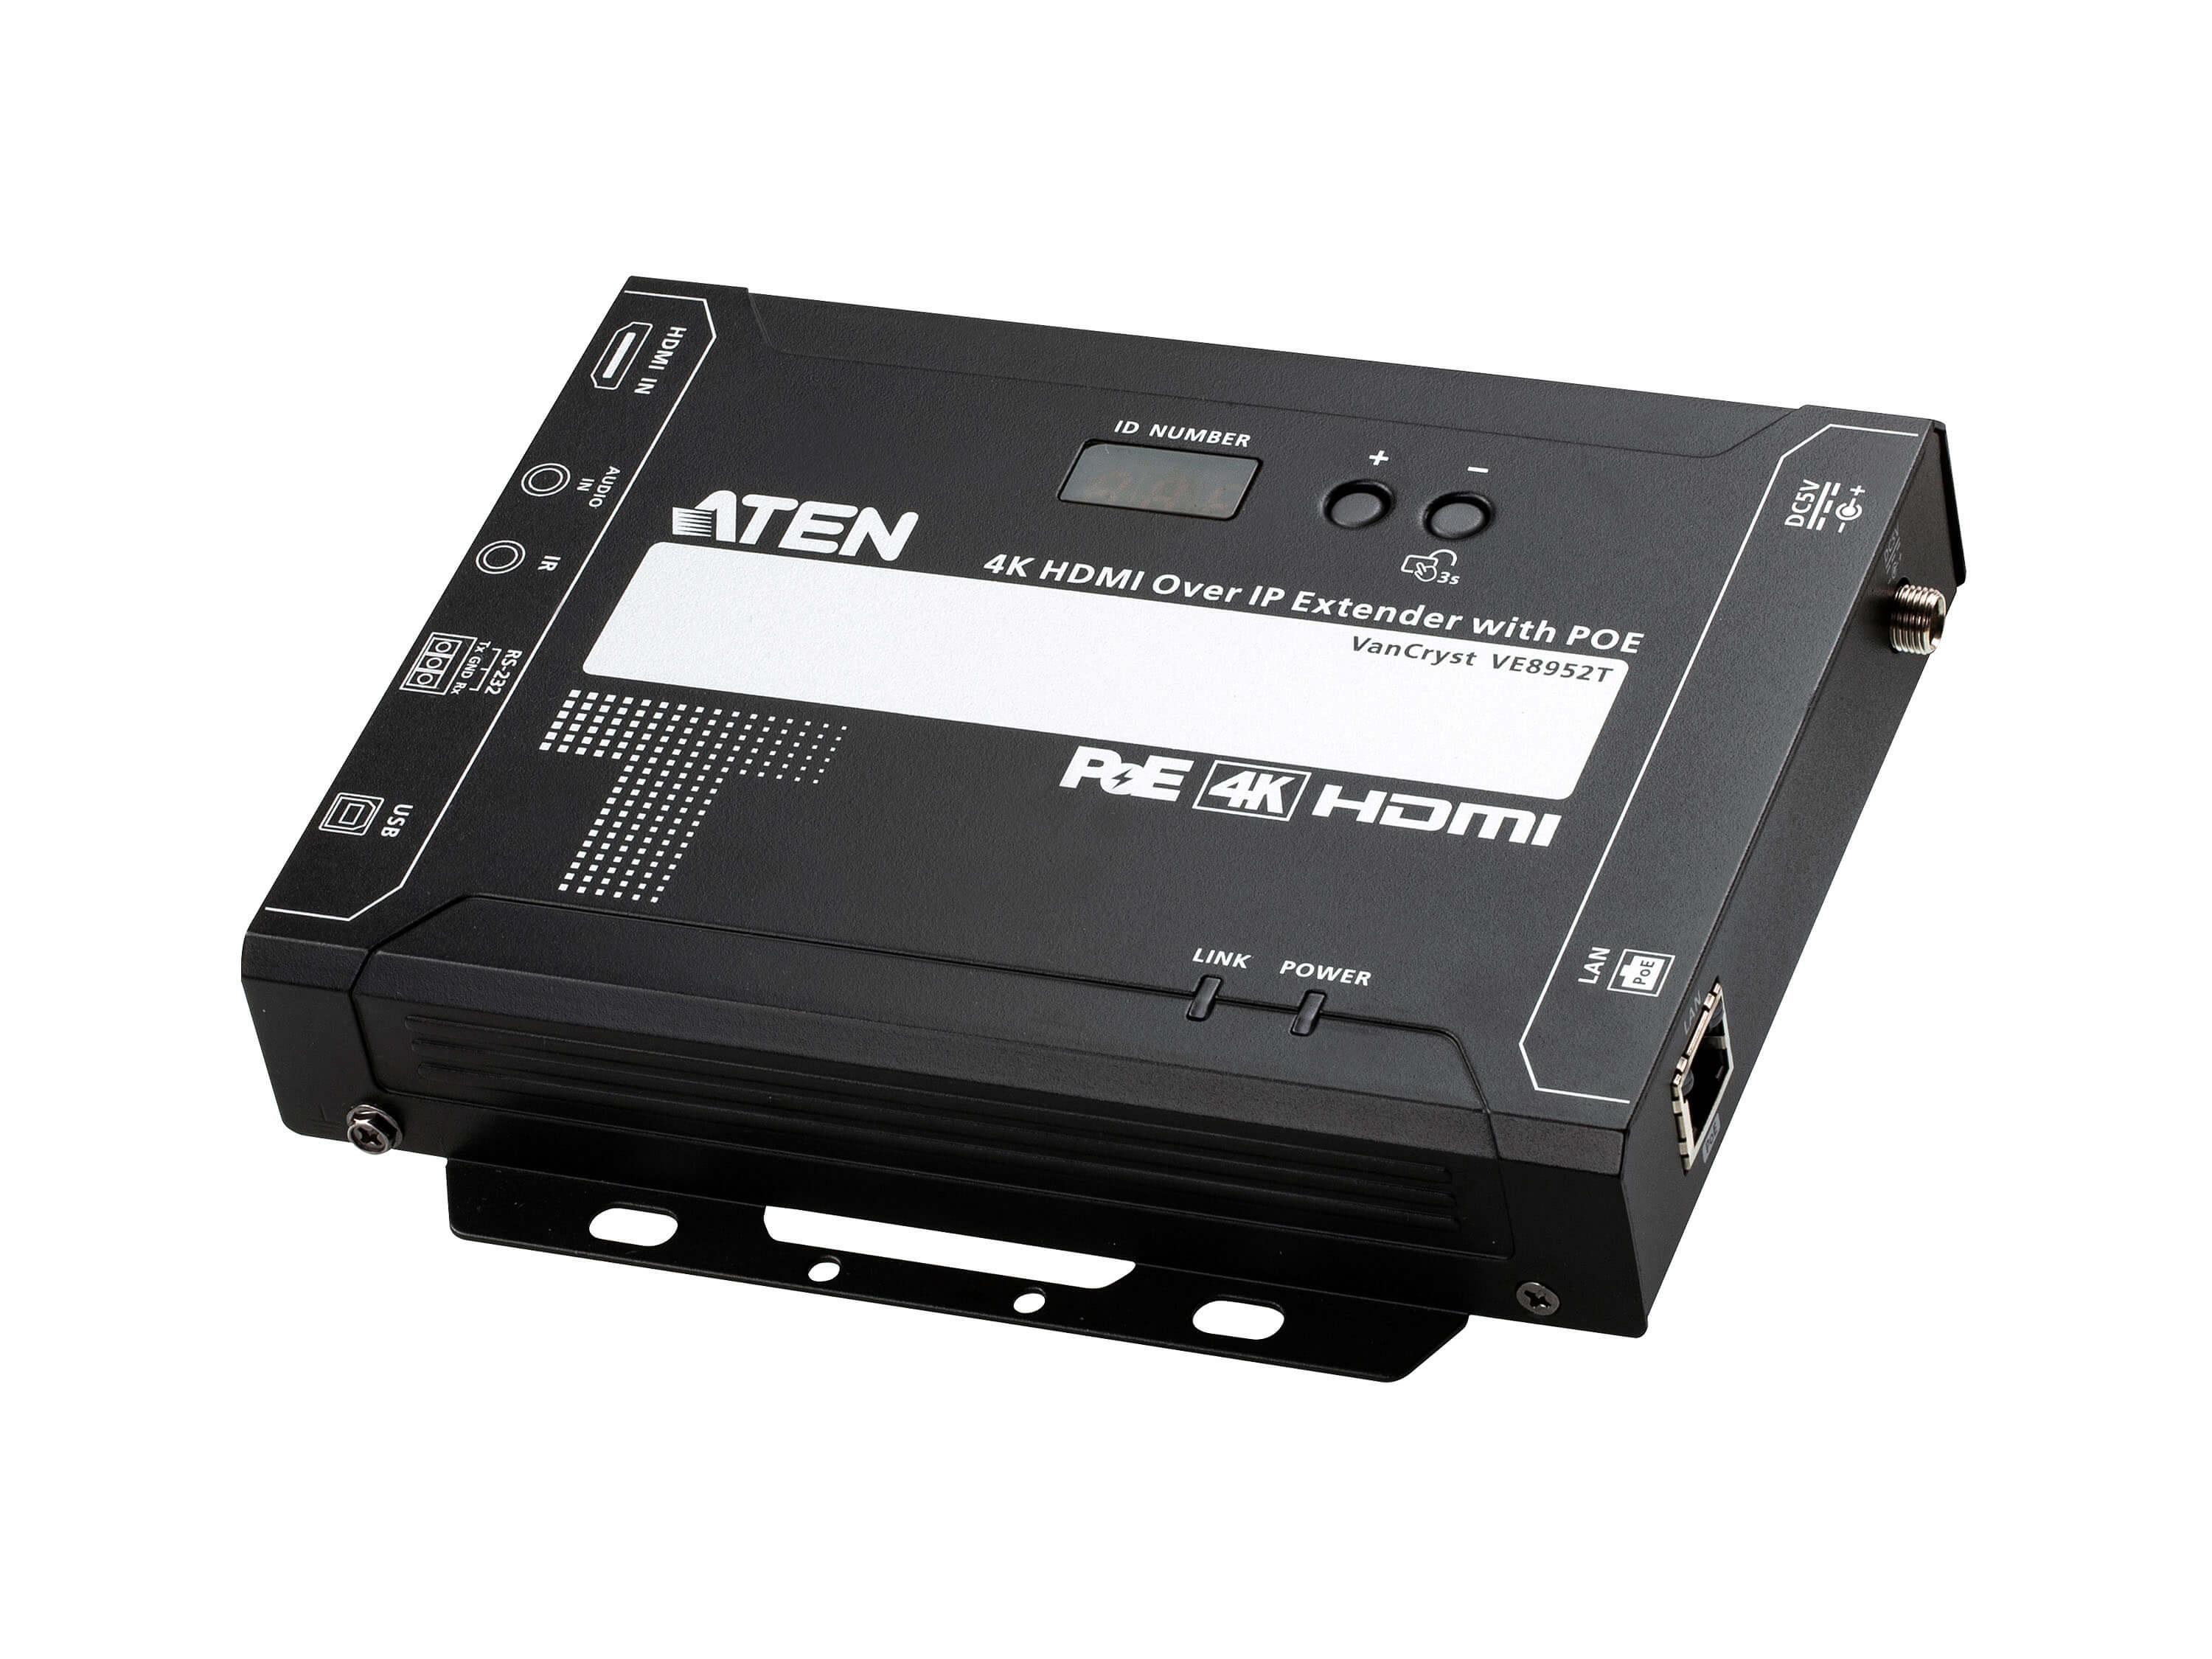 VE8952T 4K HDMI over IP Transmitter with PoE by Aten